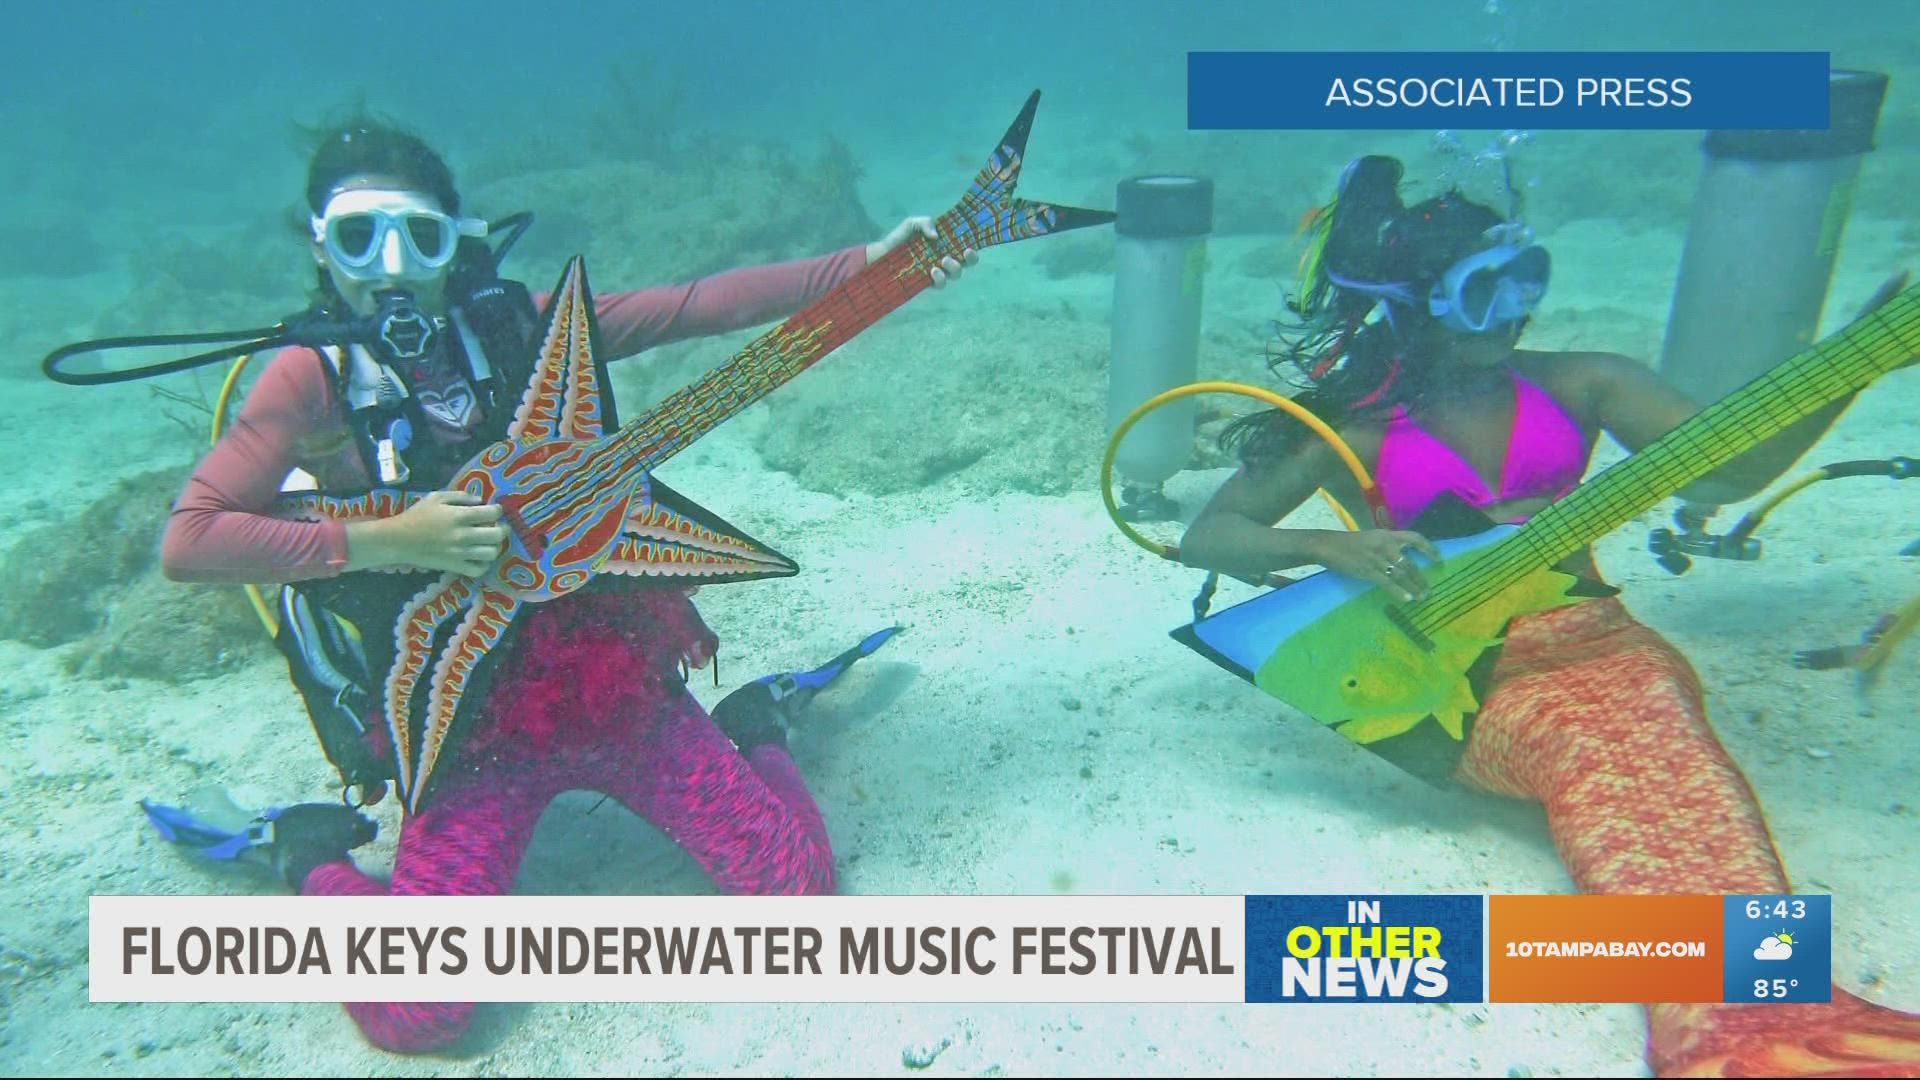 The Beatle's hit and other ocean-themed songs were part of the entertainment during the Lower Keys Underwater Music Festival.